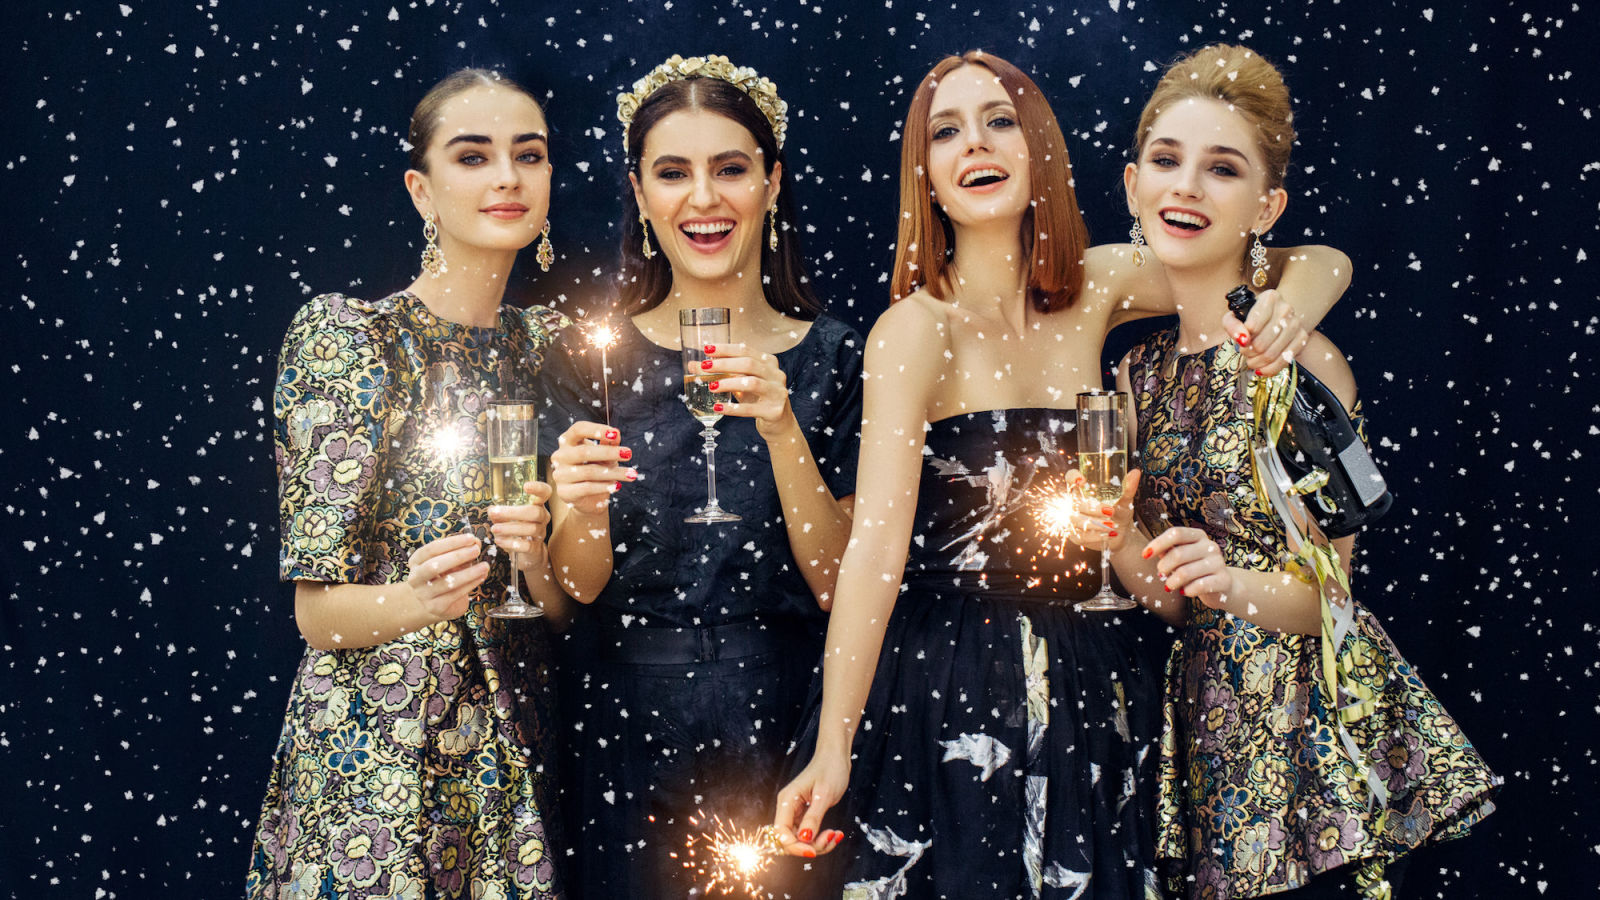 Christmas Party Perfection – Our Top Tips To Make Sure You Sleigh This Season!